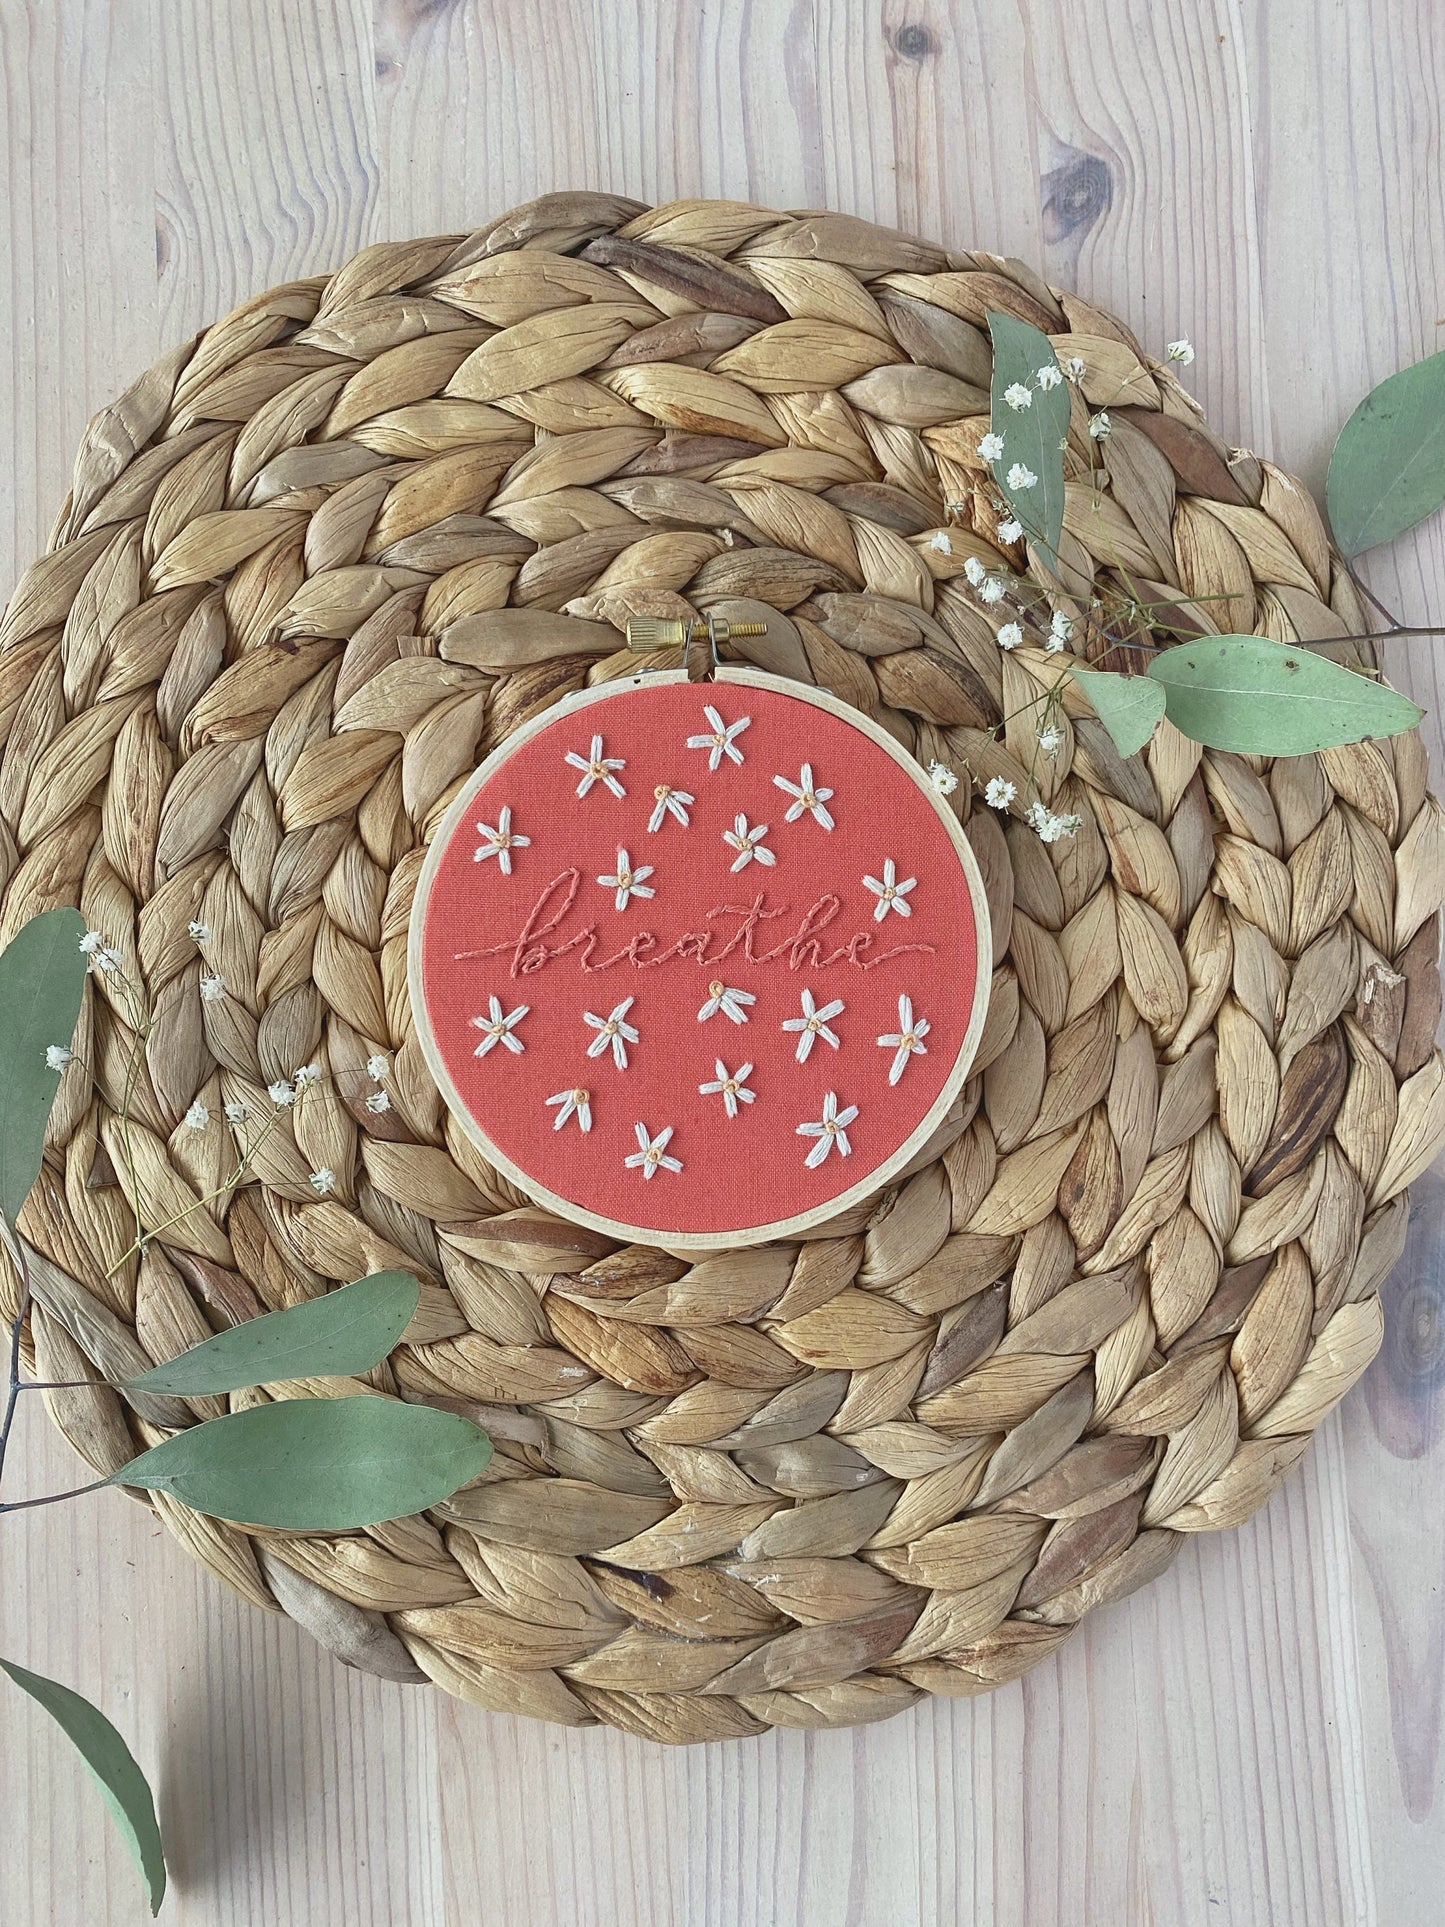 Breathe | 4” | Happy Daisy Floral Embroidery Hoop Art for Home Decor with Subtle Calligraphy Lettering Tangerine